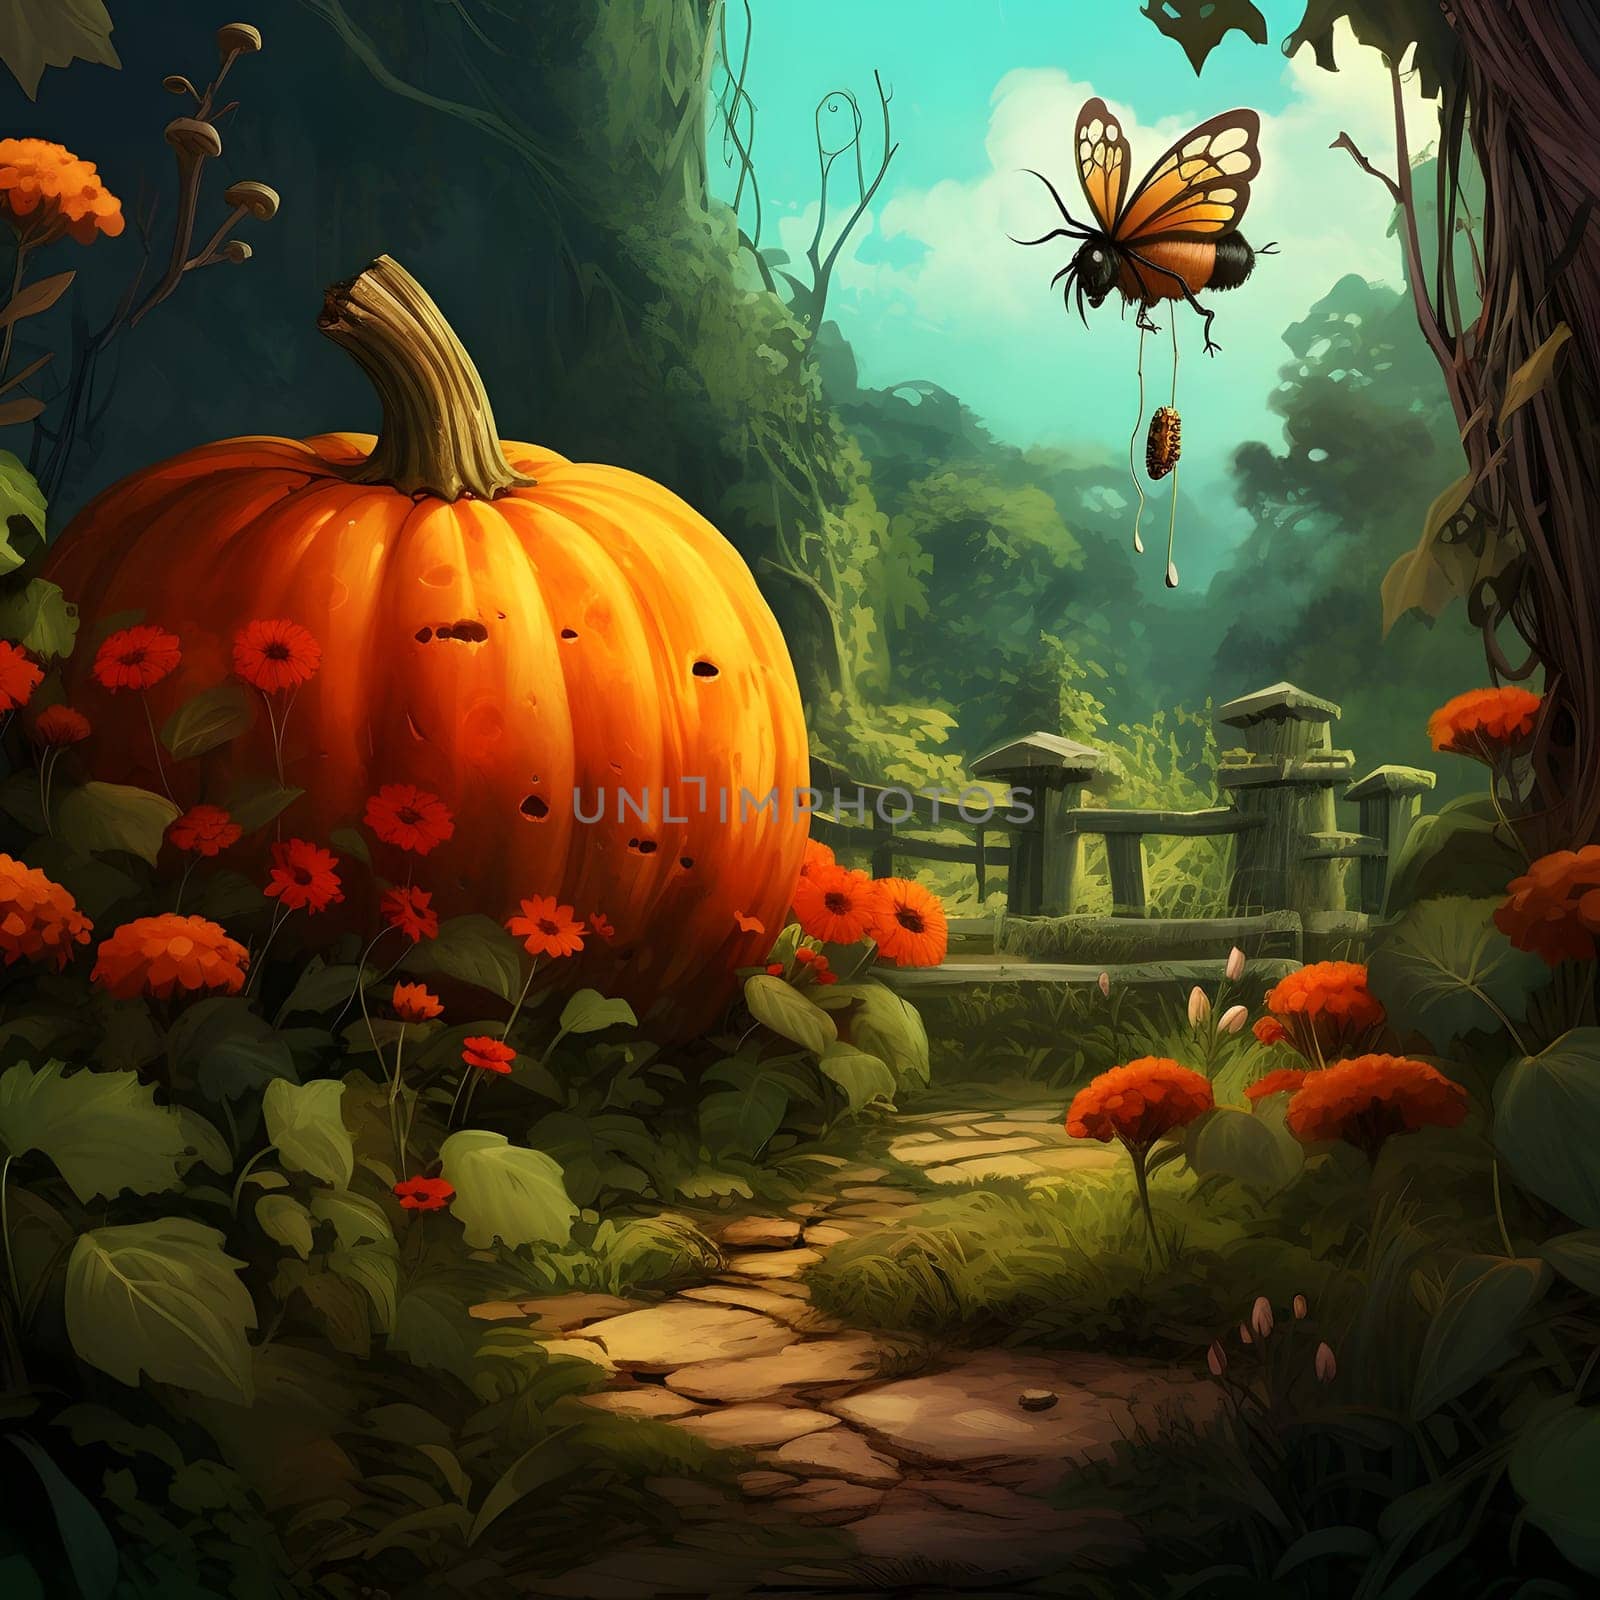 Fairy tale image big bee butterfly, pumpkin, red flowers. Pumpkin as a dish of thanksgiving for the harvest. An atmosphere of joy and celebration.